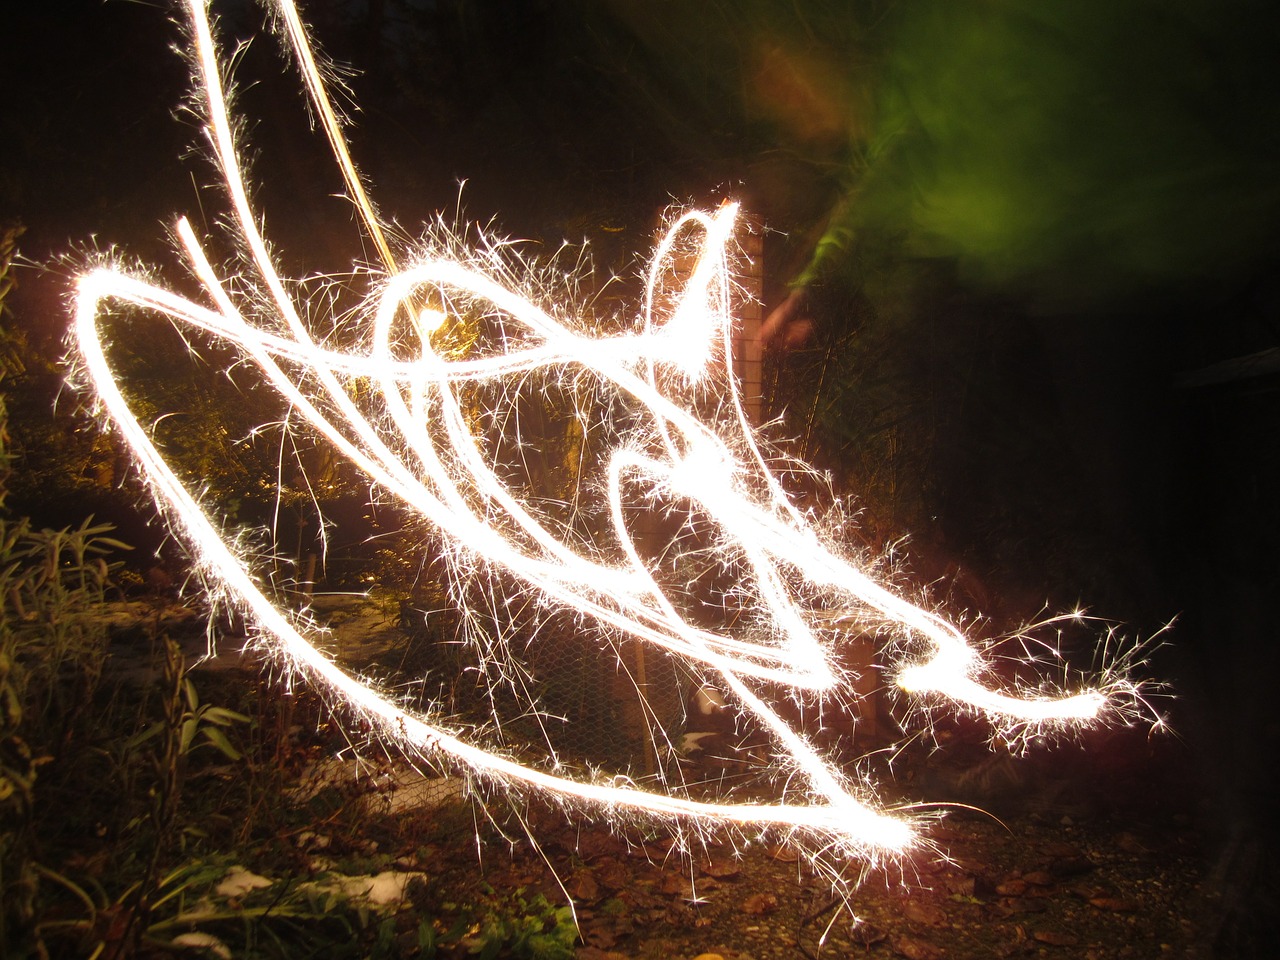 lightpainting new year's eve sparkler free photo